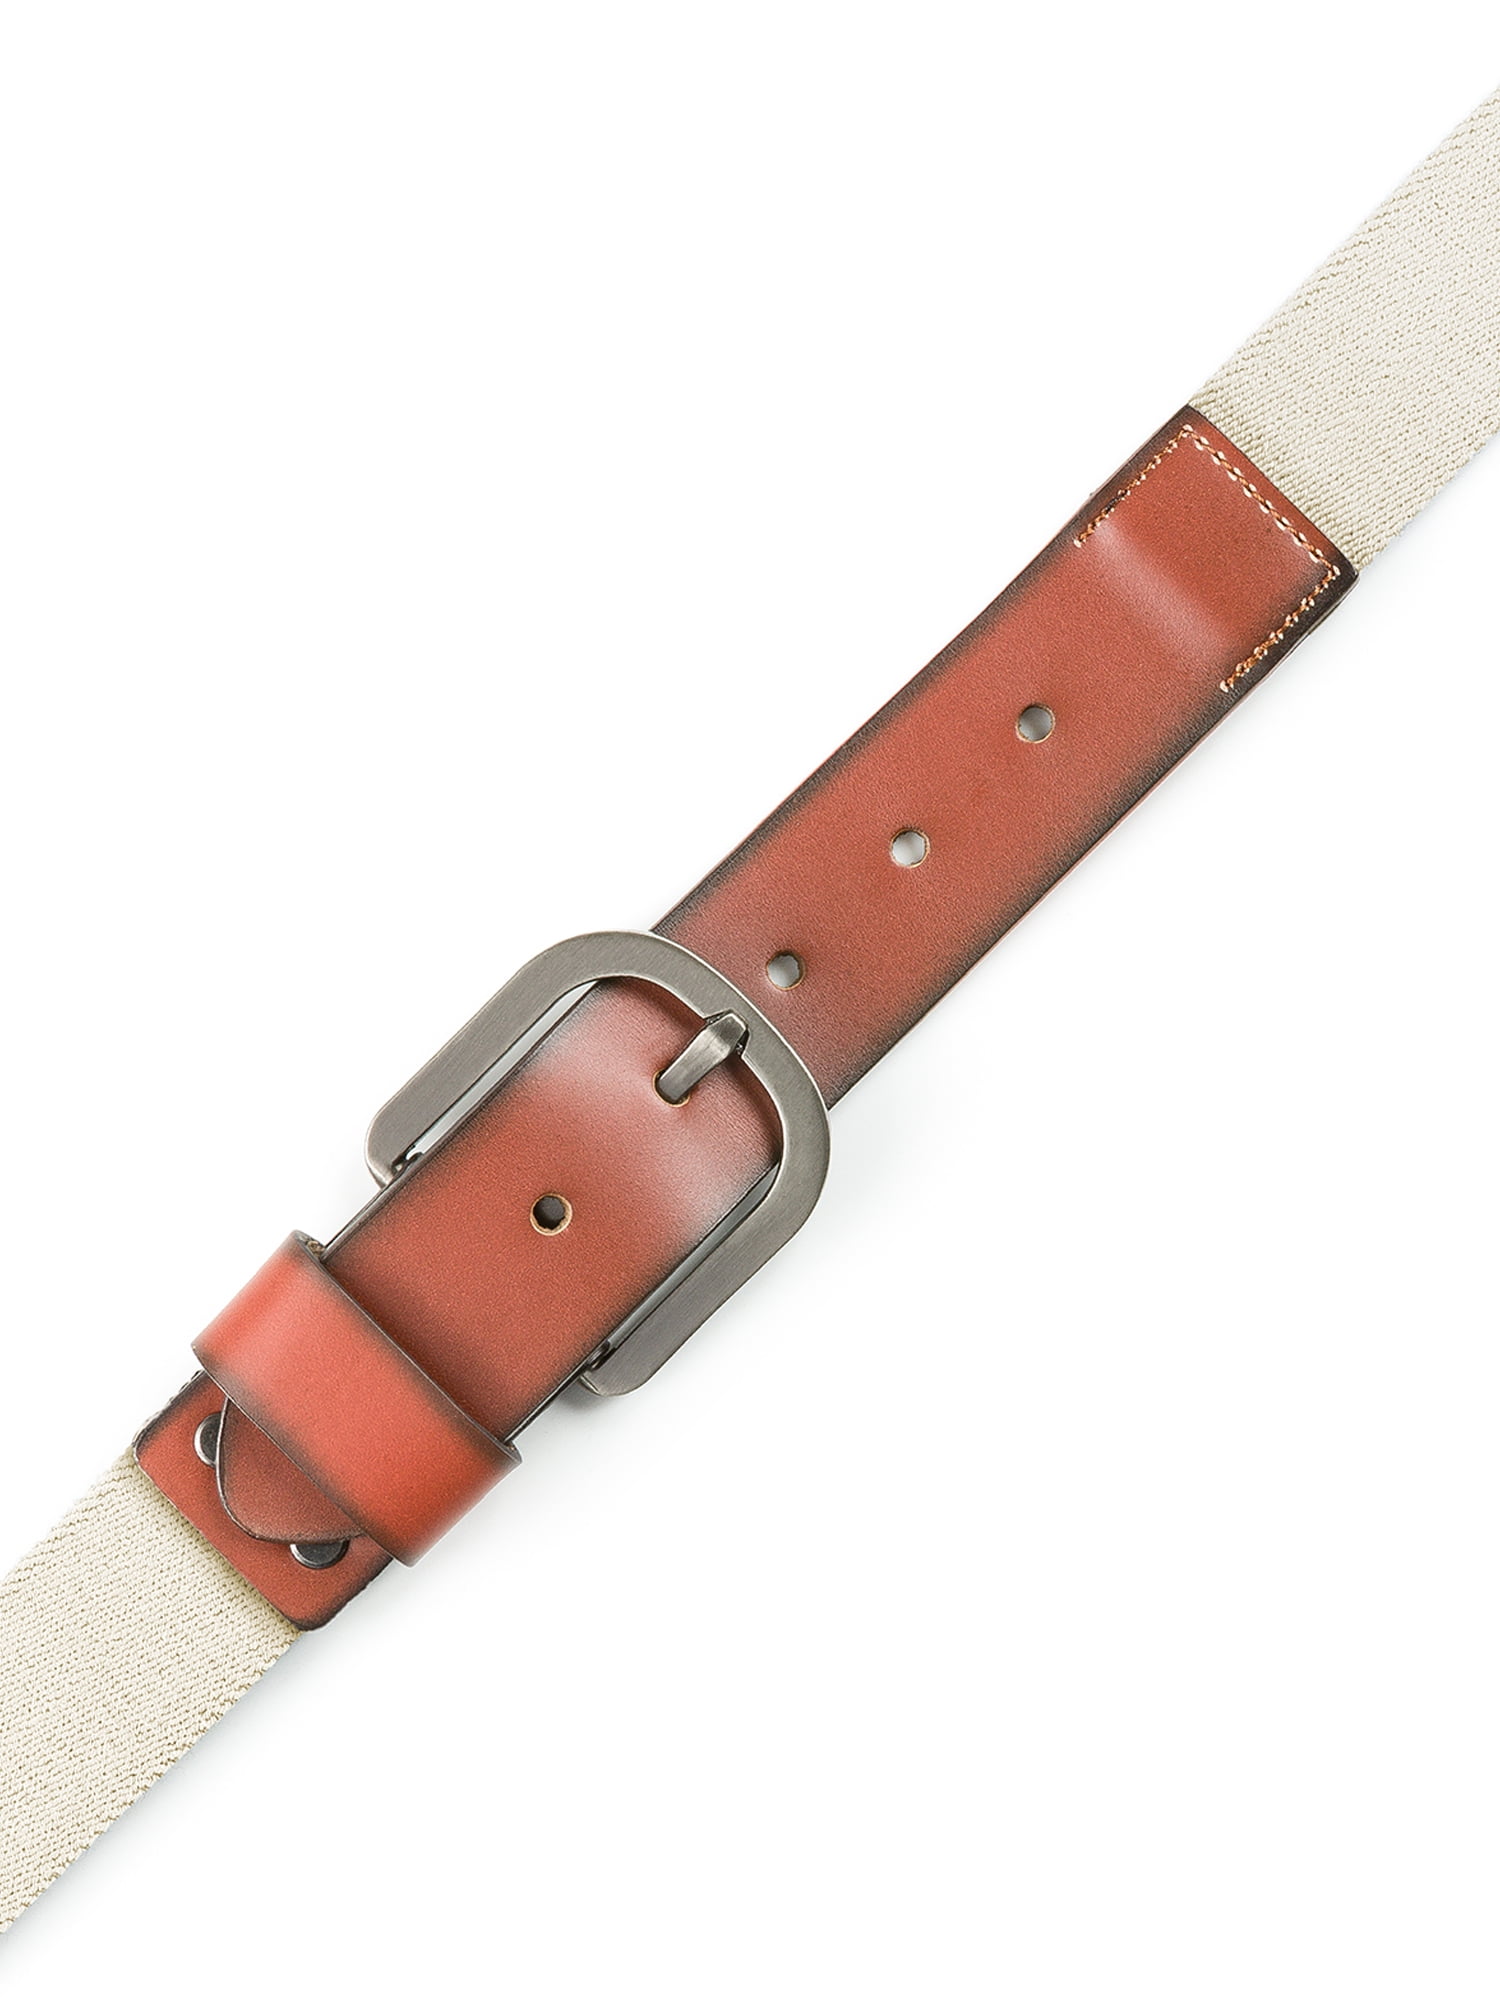 Adjustable Stretch Strap by Marino Ave Men’s Elastic Belt Leather Front 